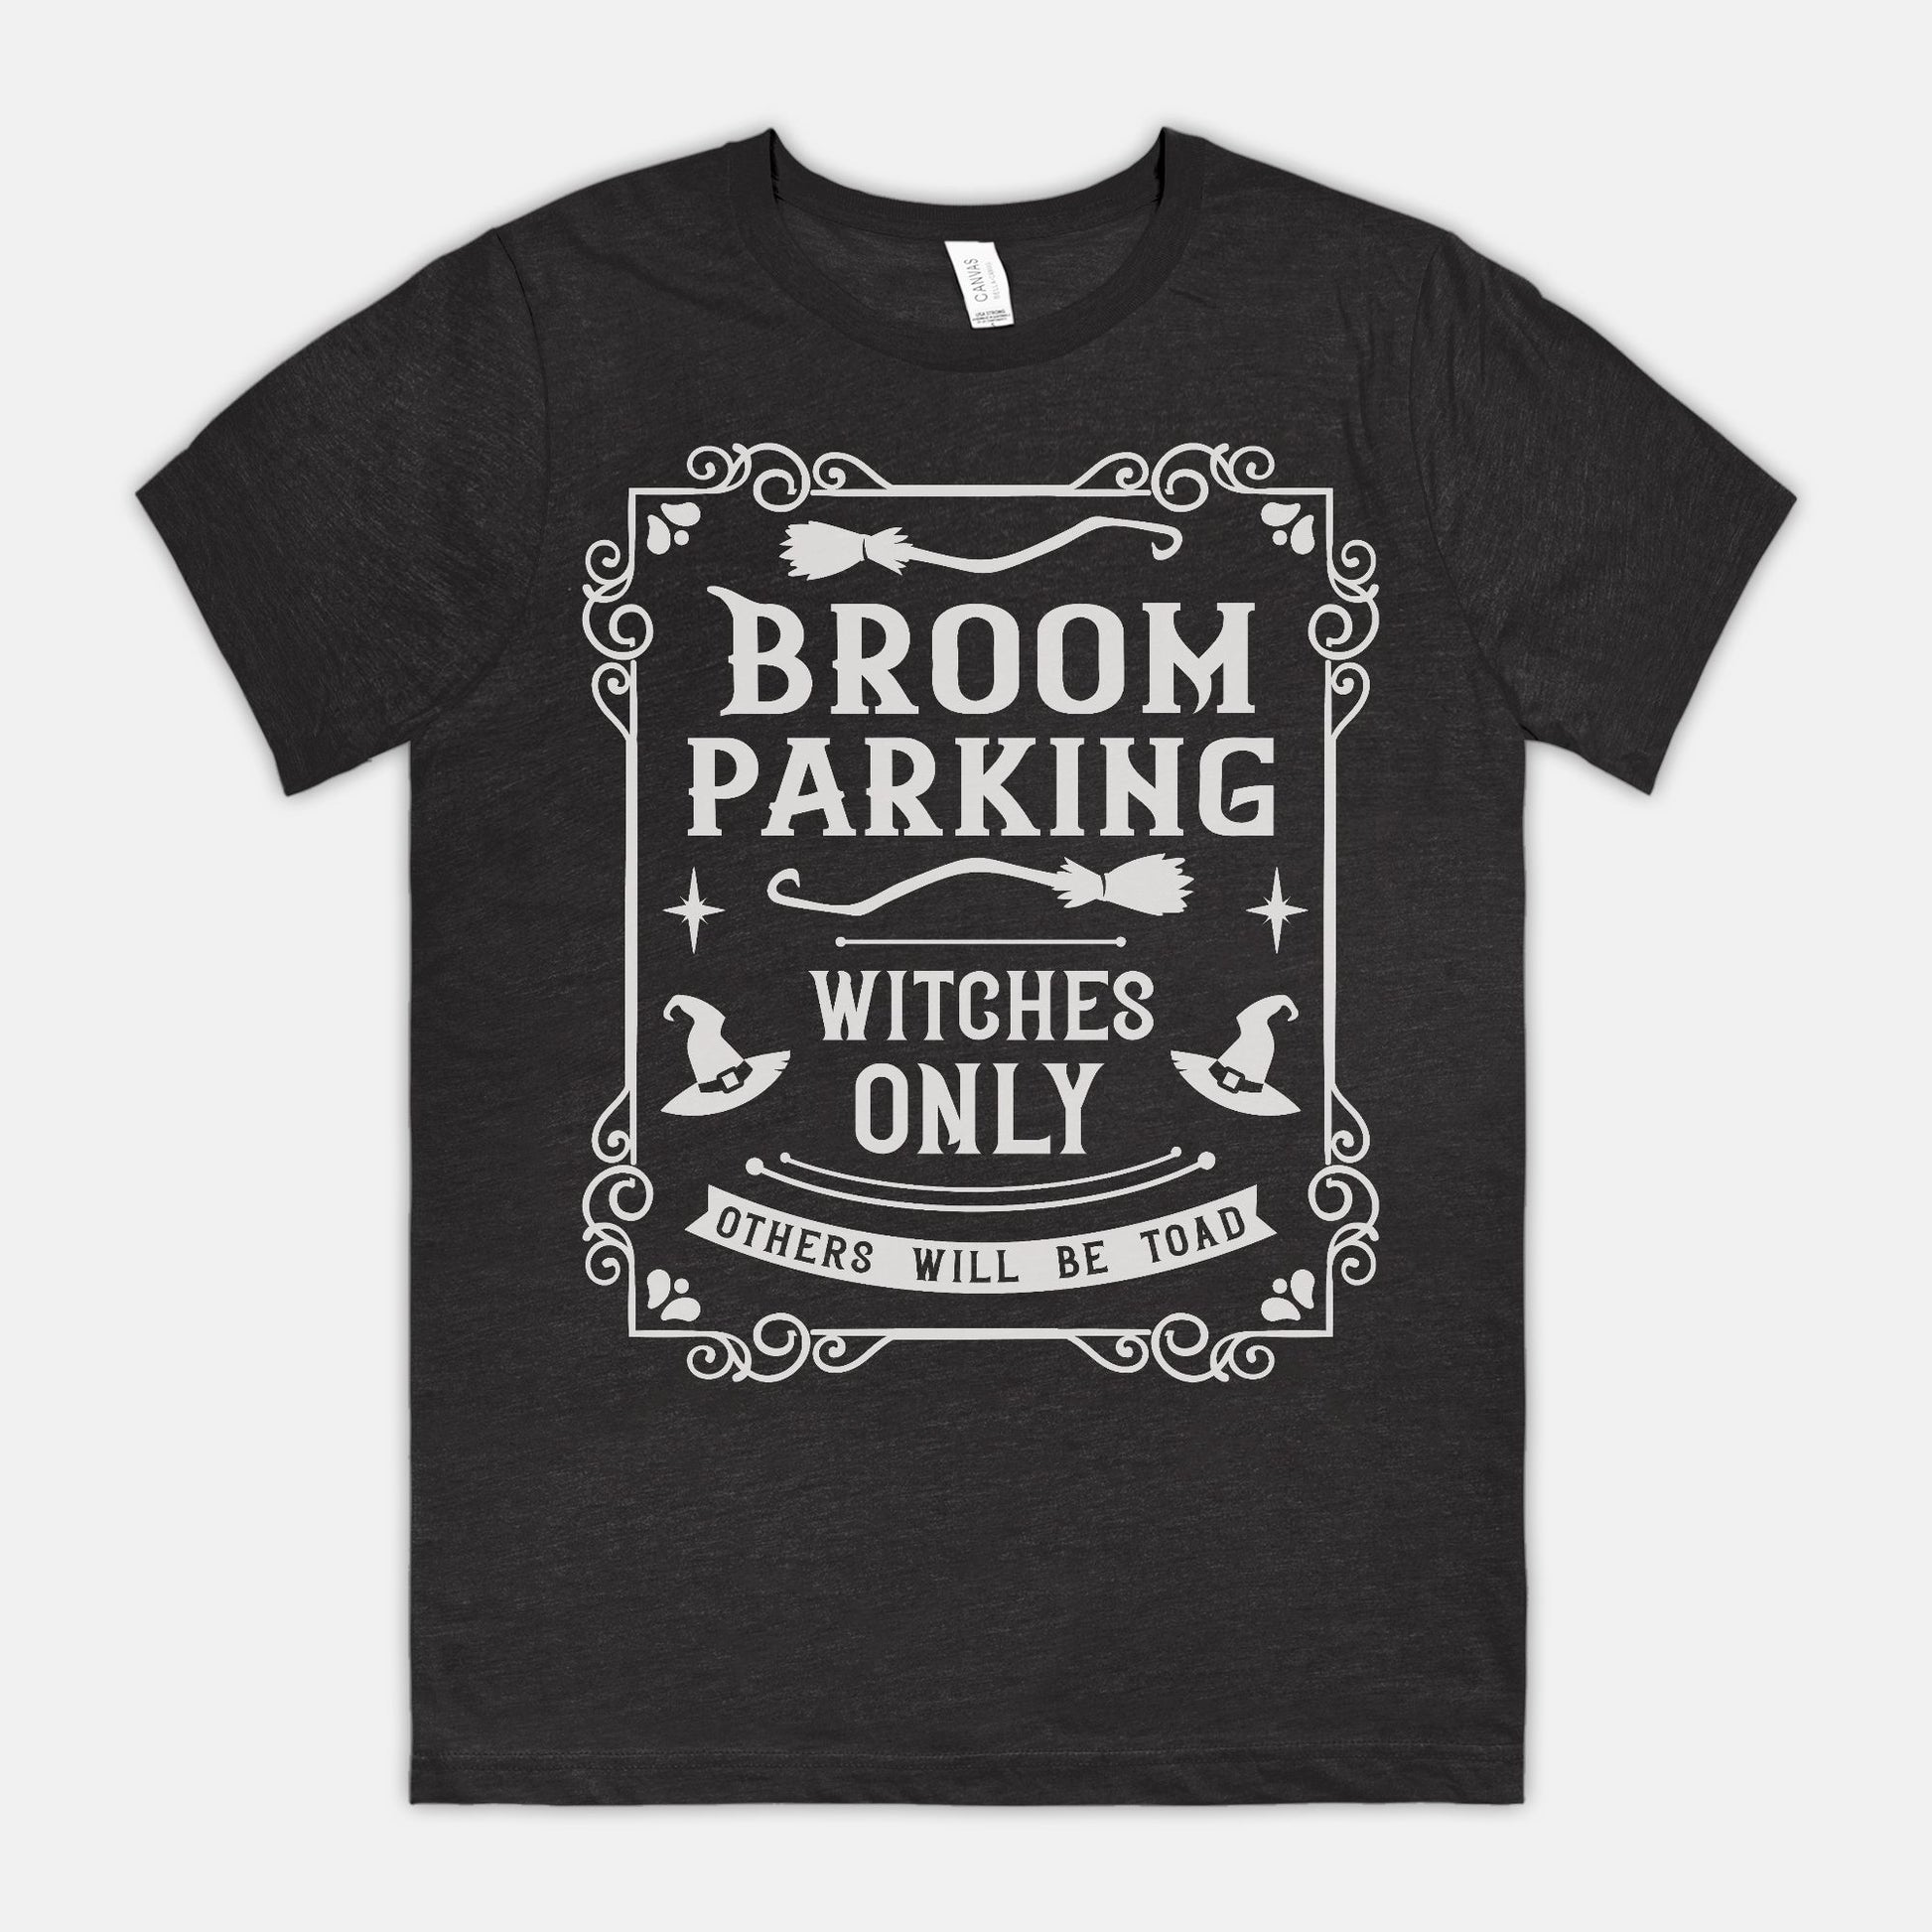 Broom Parking Witchy T-shirt 